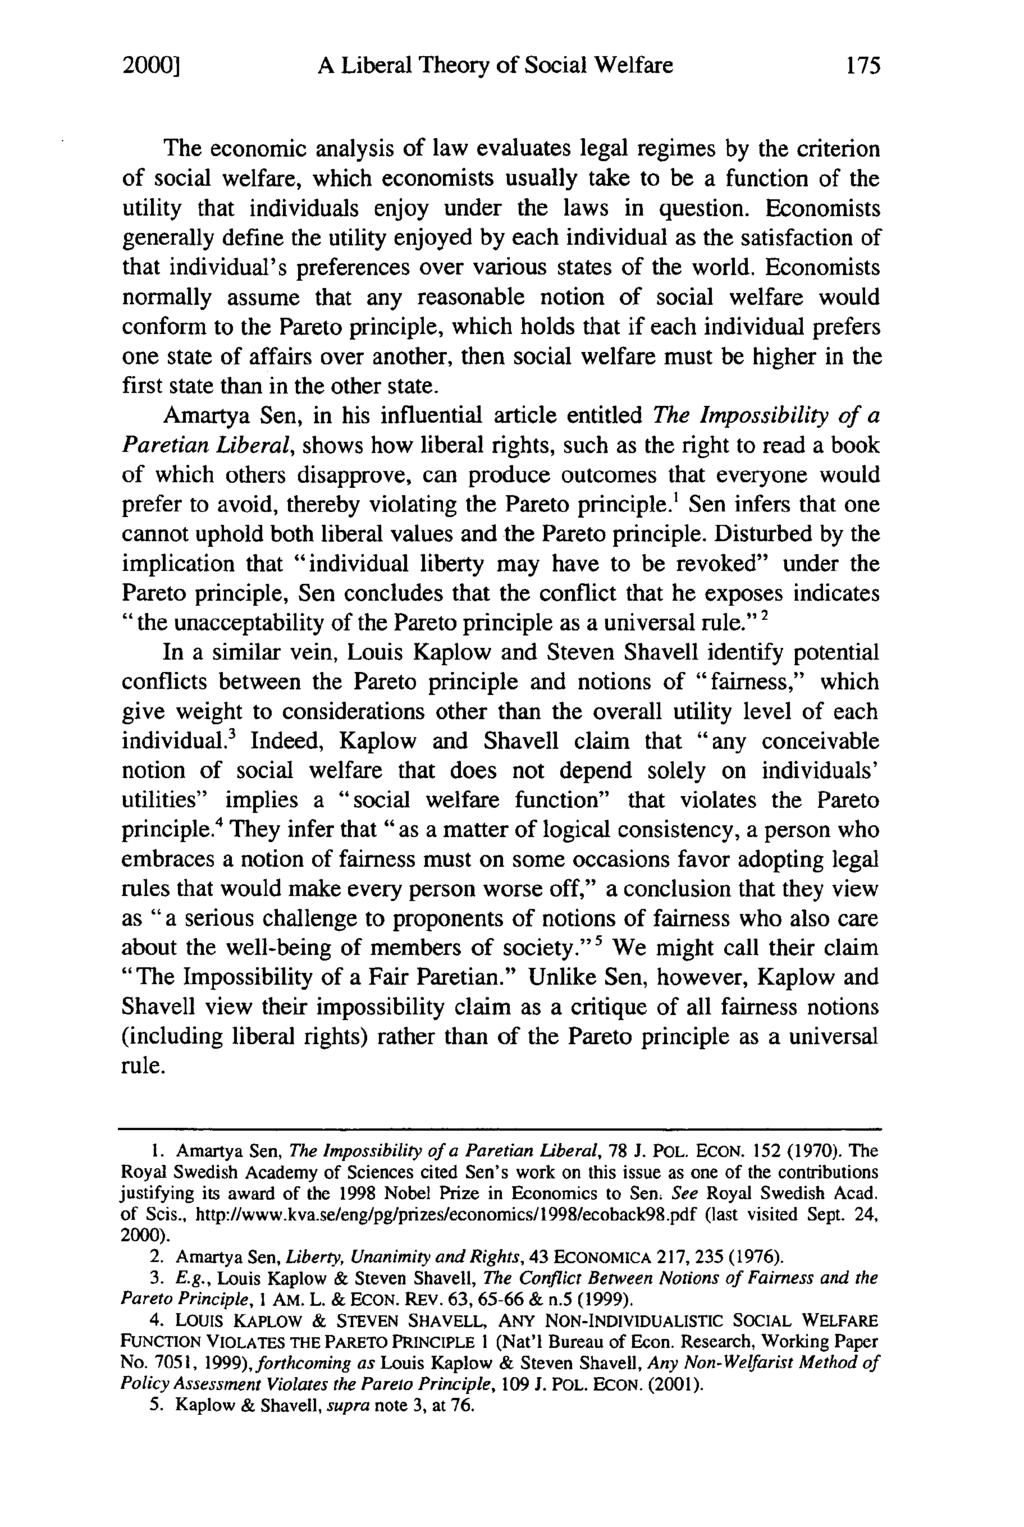 2000] A Liberal Theory of Social Welfare The economic analysis of law evaluates legal regimes by the criterion of social welfare, which economists usually take to be a function of the utility that